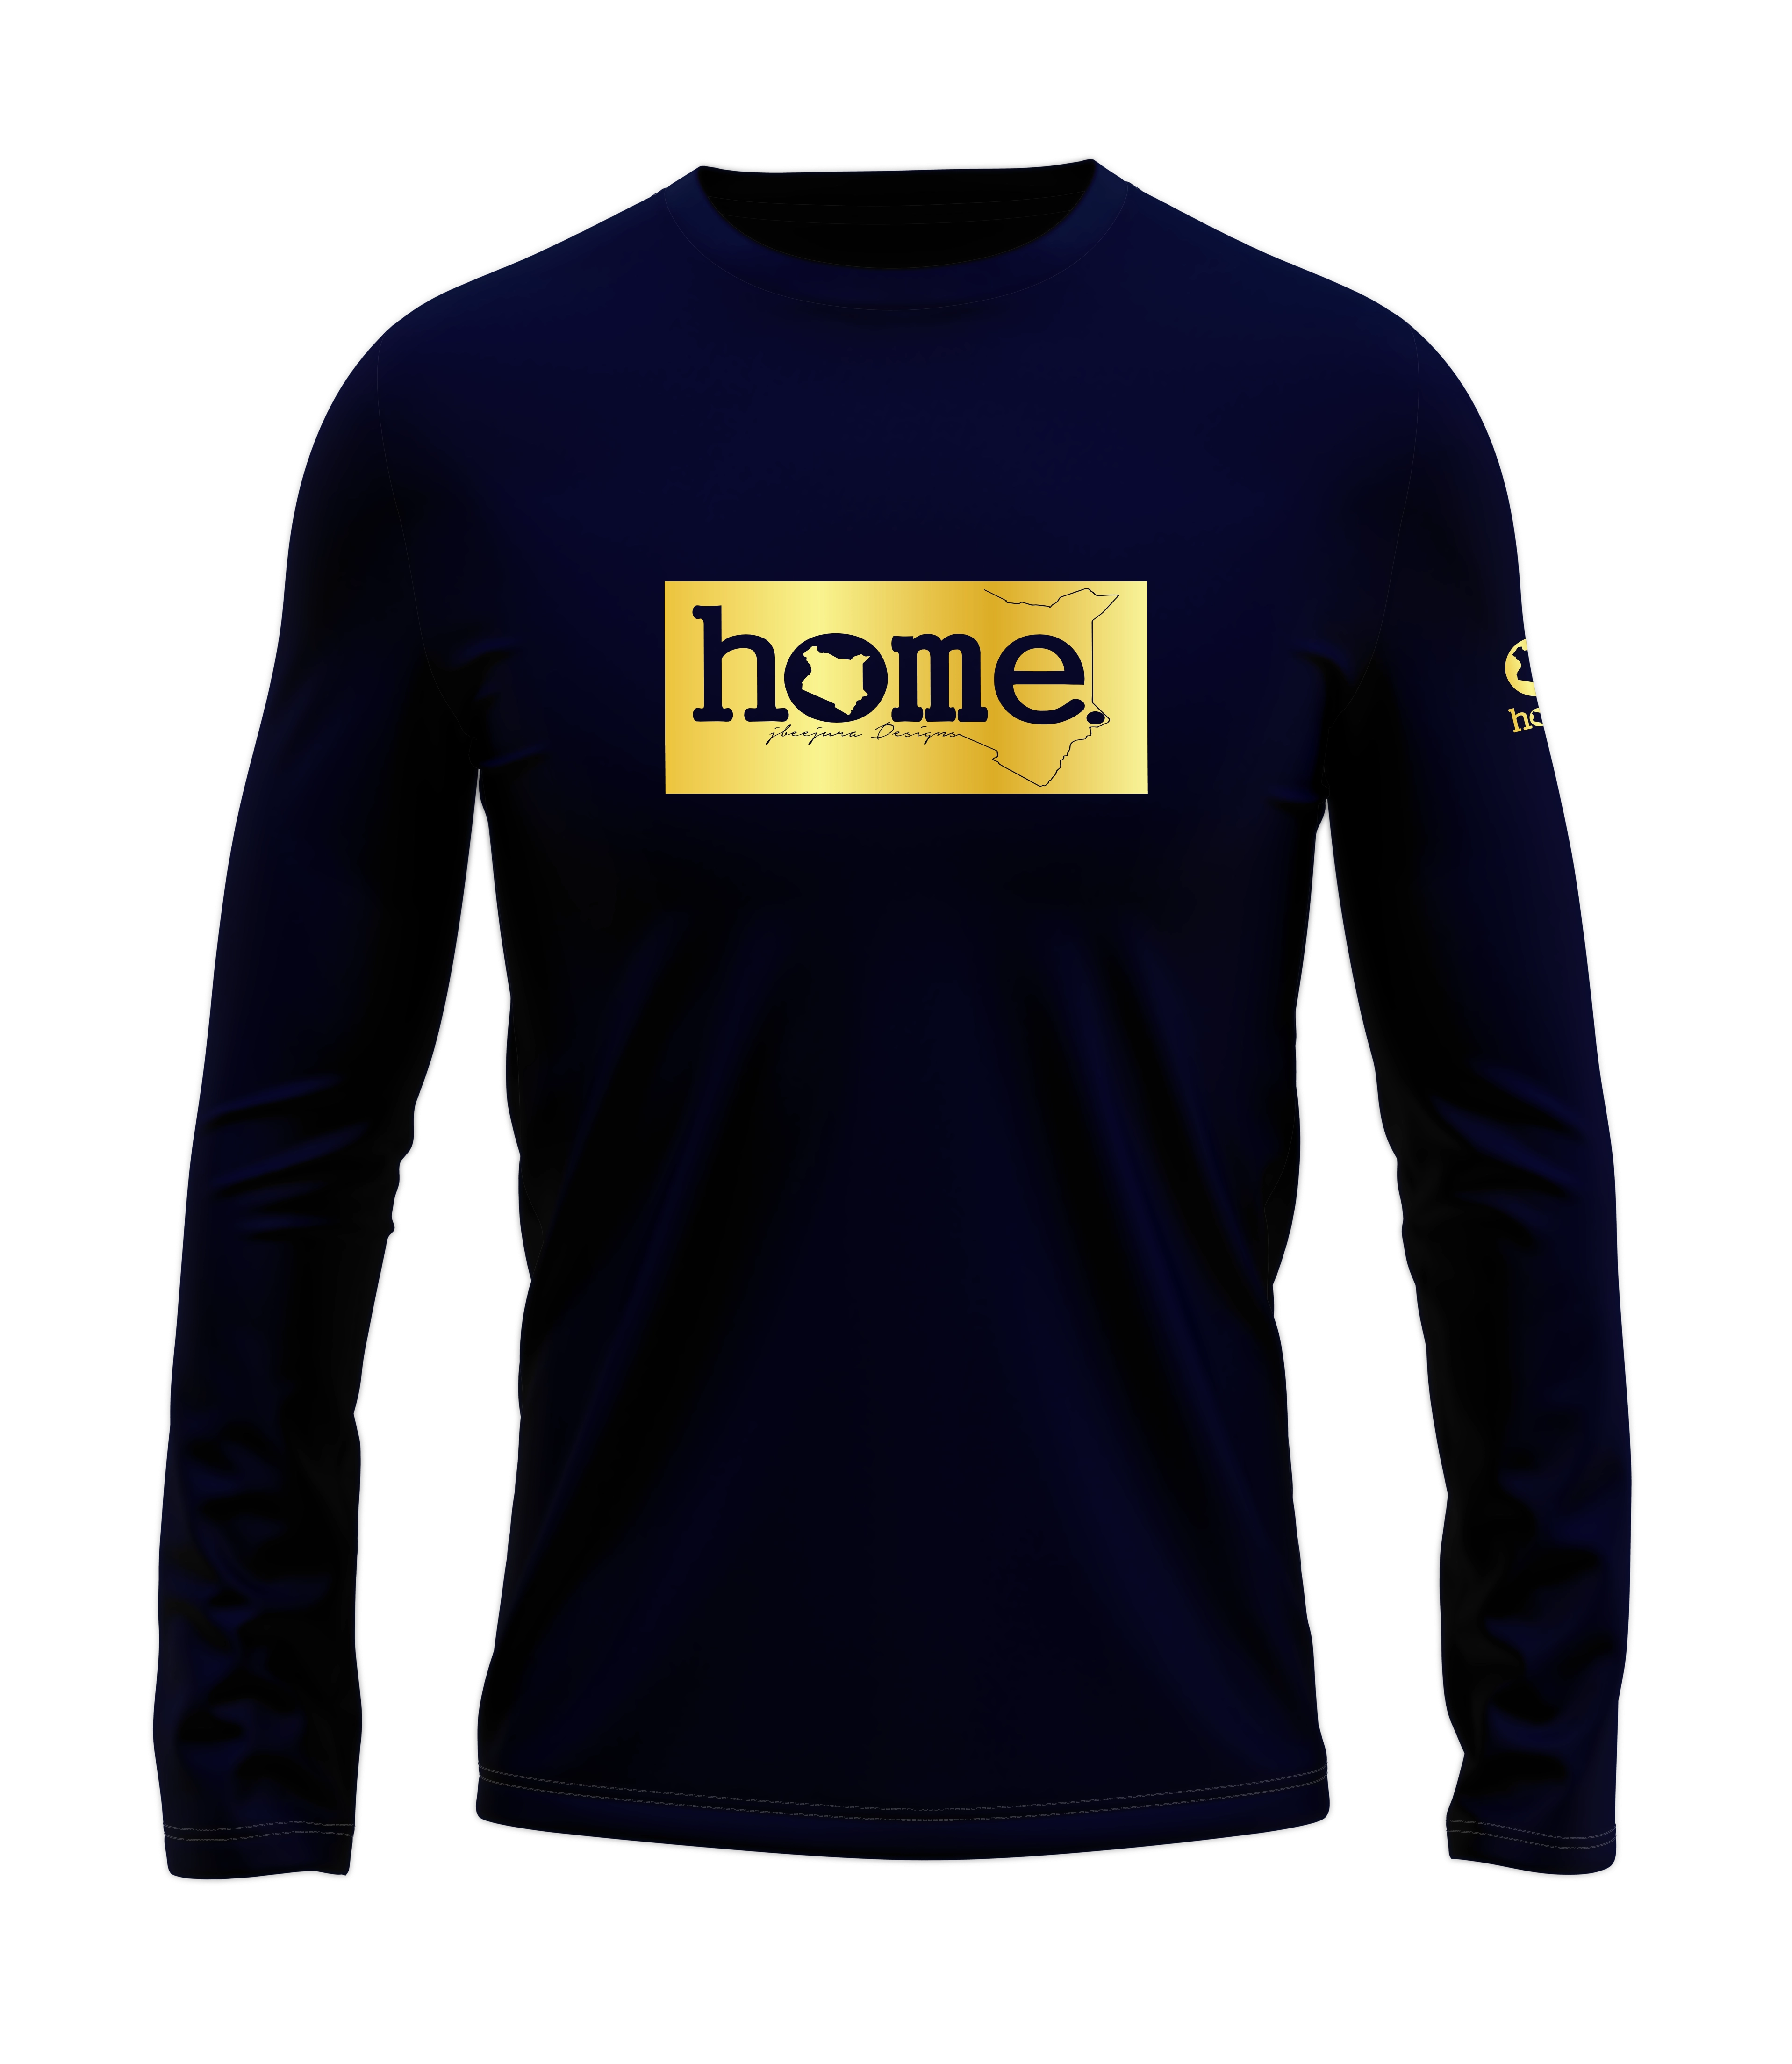 home_254 LONG-SLEEVED NAVY BLUE T-SHIRT WITH A GOLD CLASSIC PRINT – COTTON PLUS FABRIC